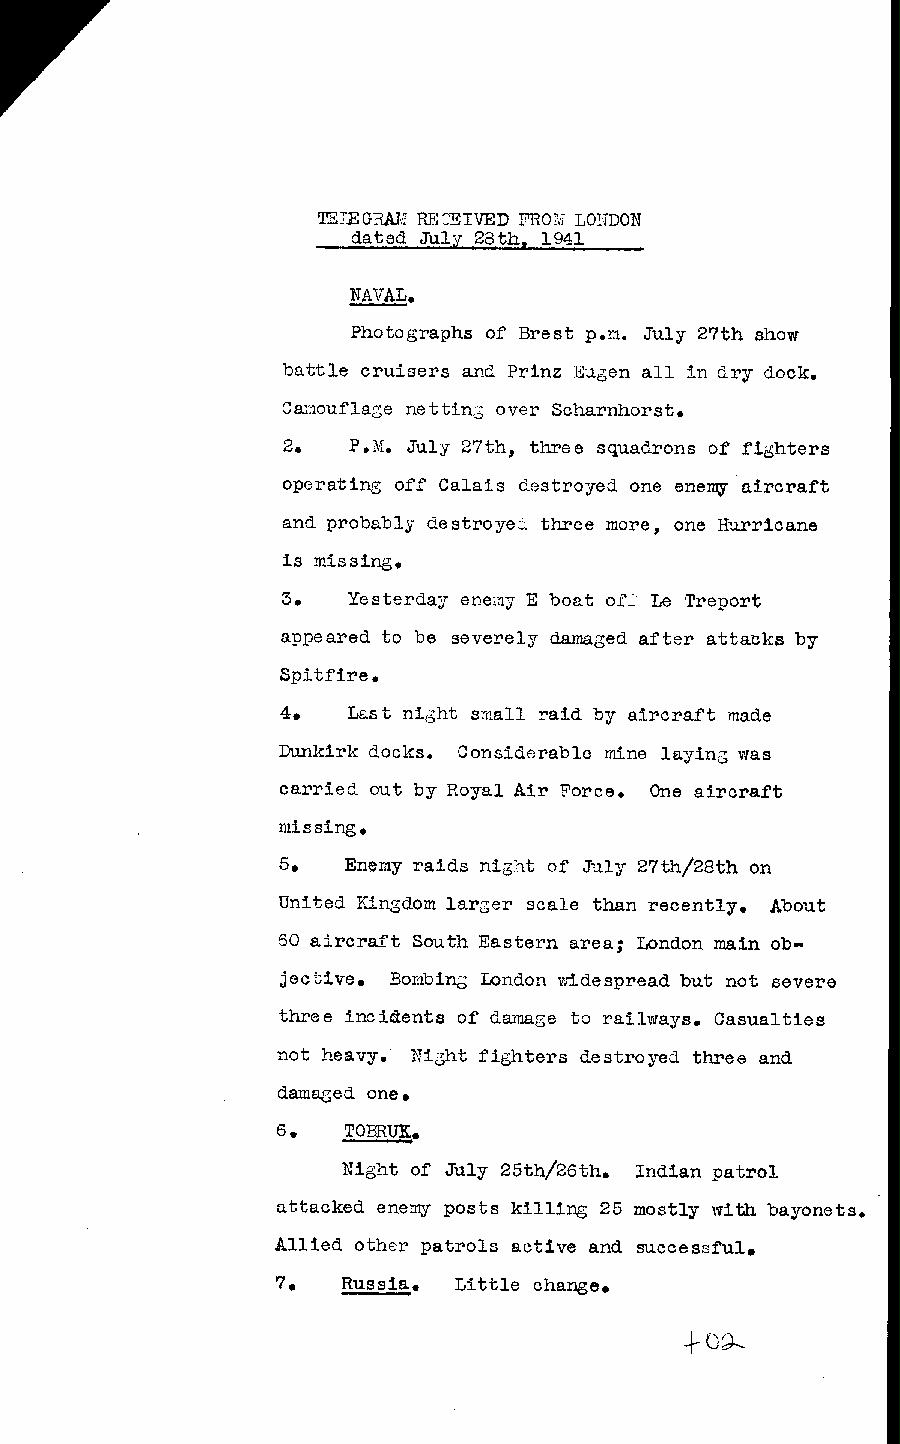 [a322t02.jpg] - Report on military situation 7/28/41